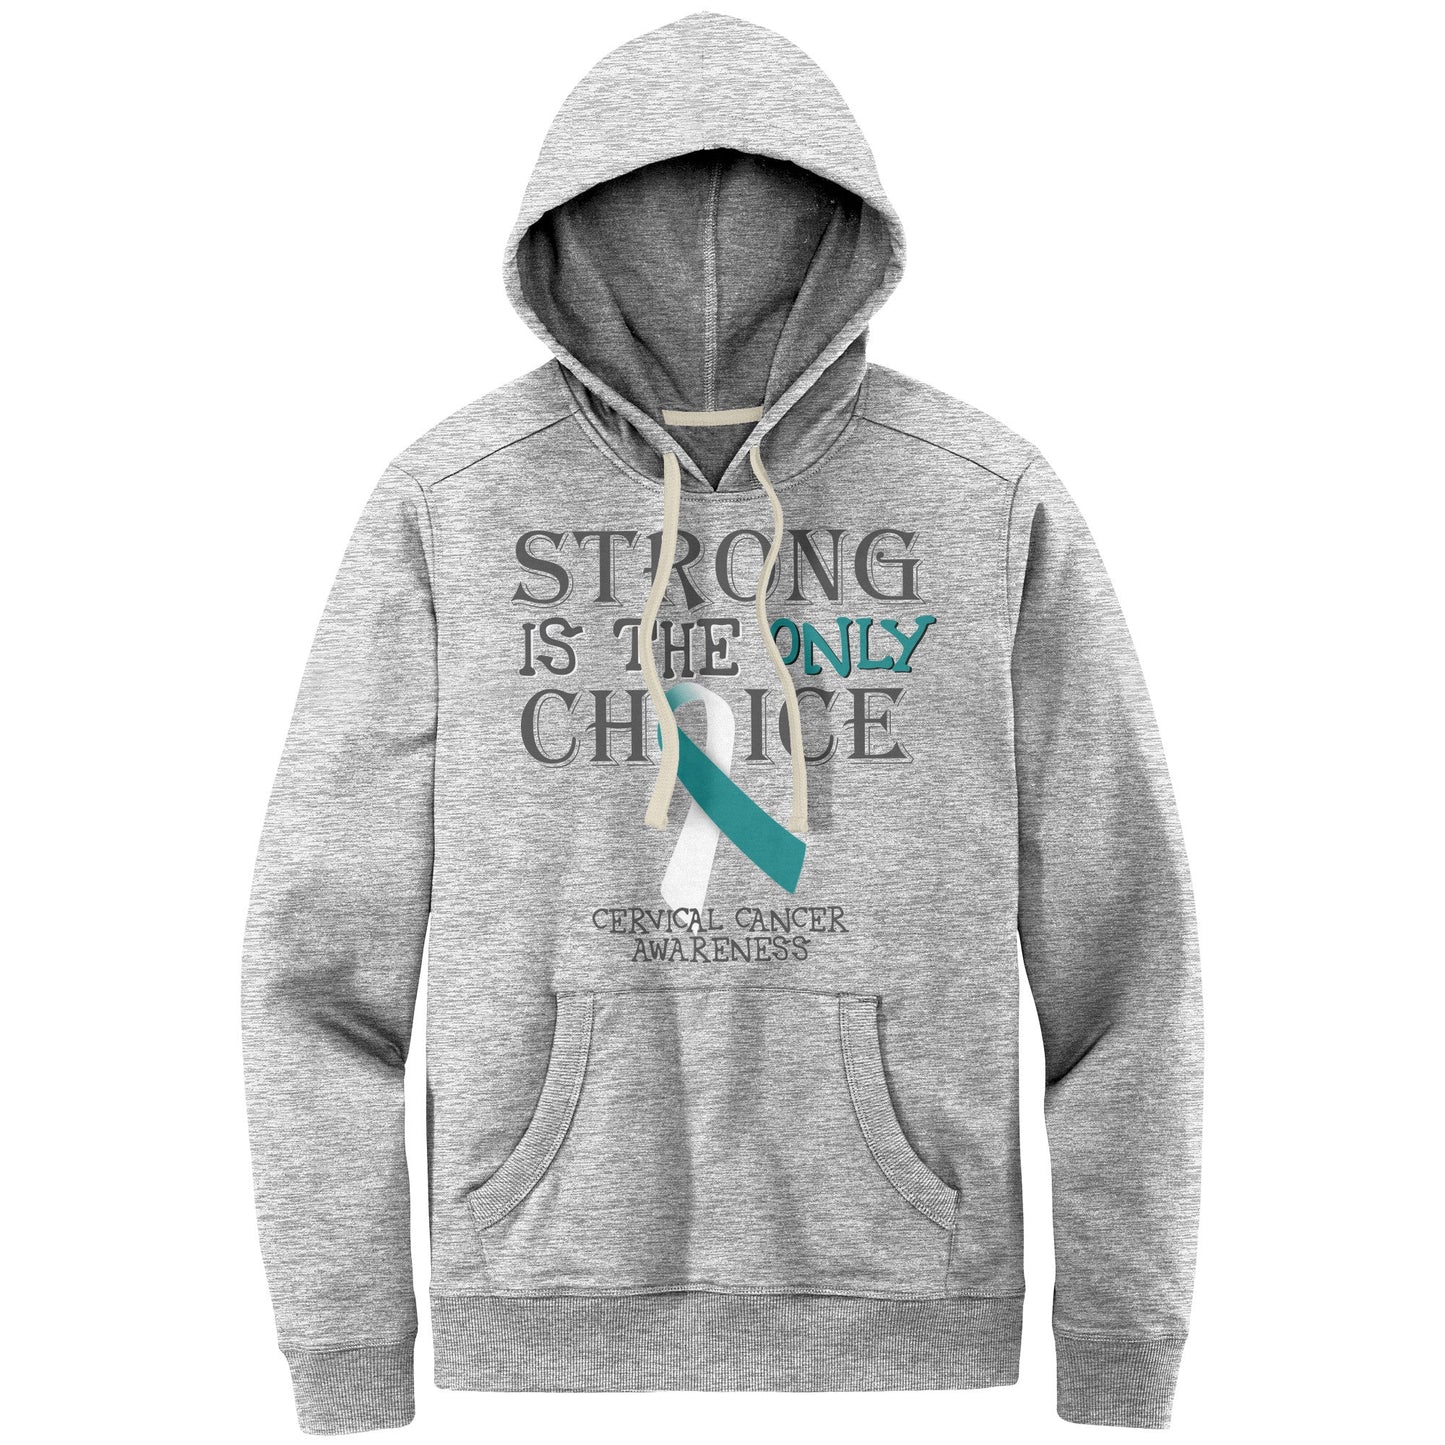 Strong is the Only Choice -Cervical Cancer Awareness T-Shirt, Hoodie, Tank |x|